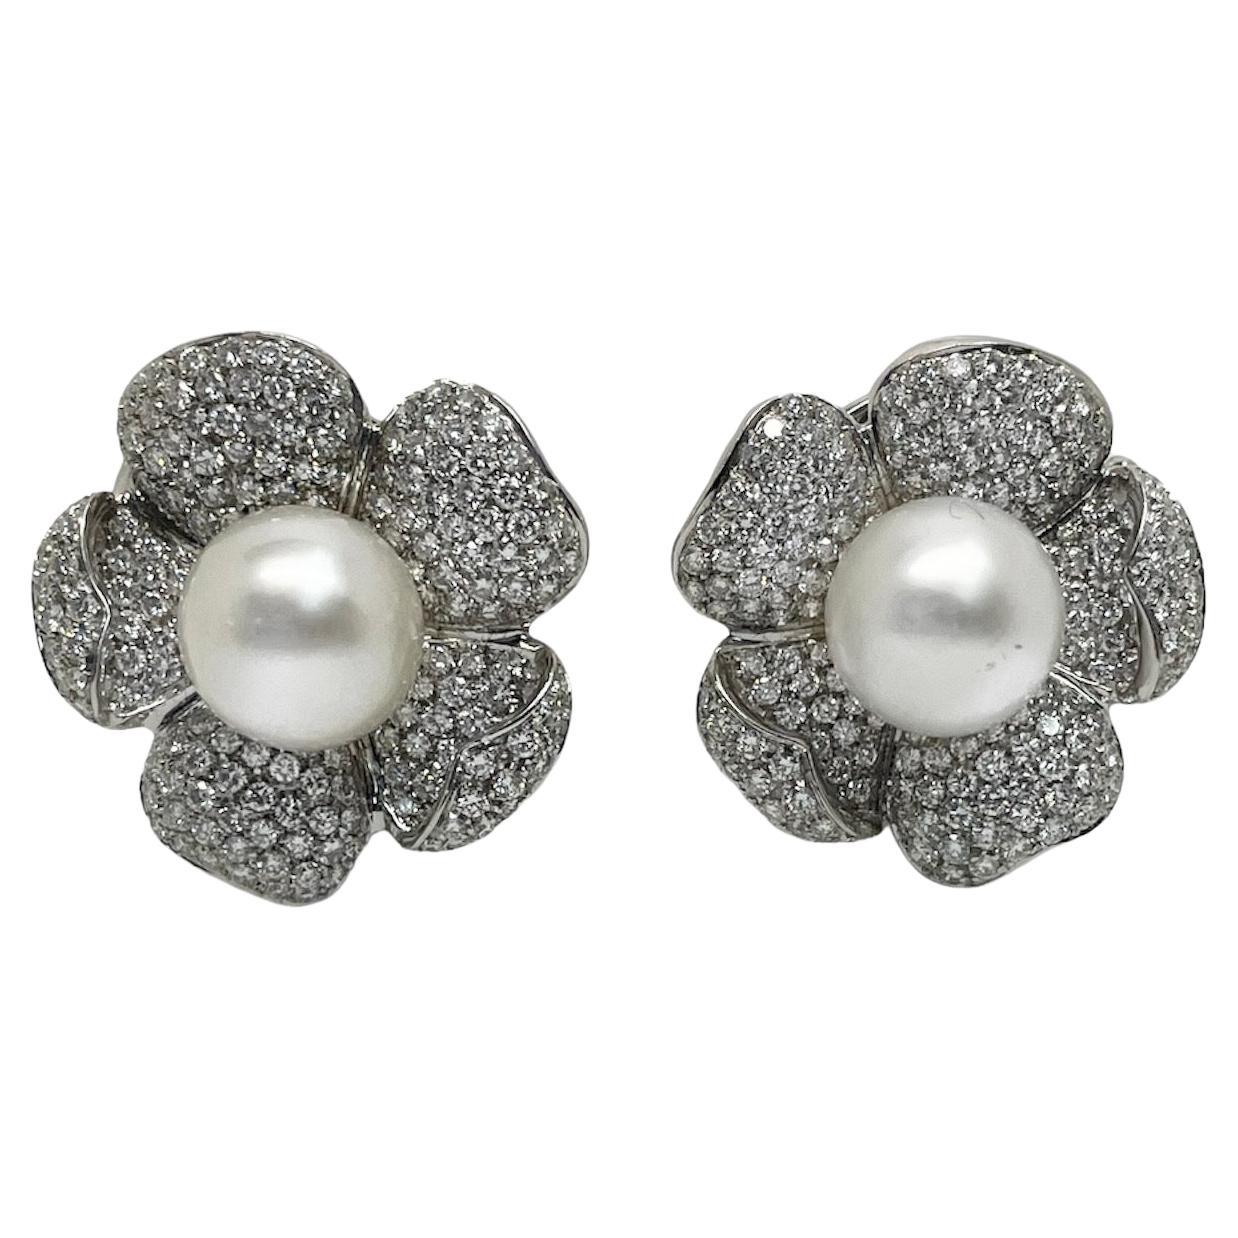 Roberto Casarin, Cultured South Sea Pearl and Diamond Flower Earrings